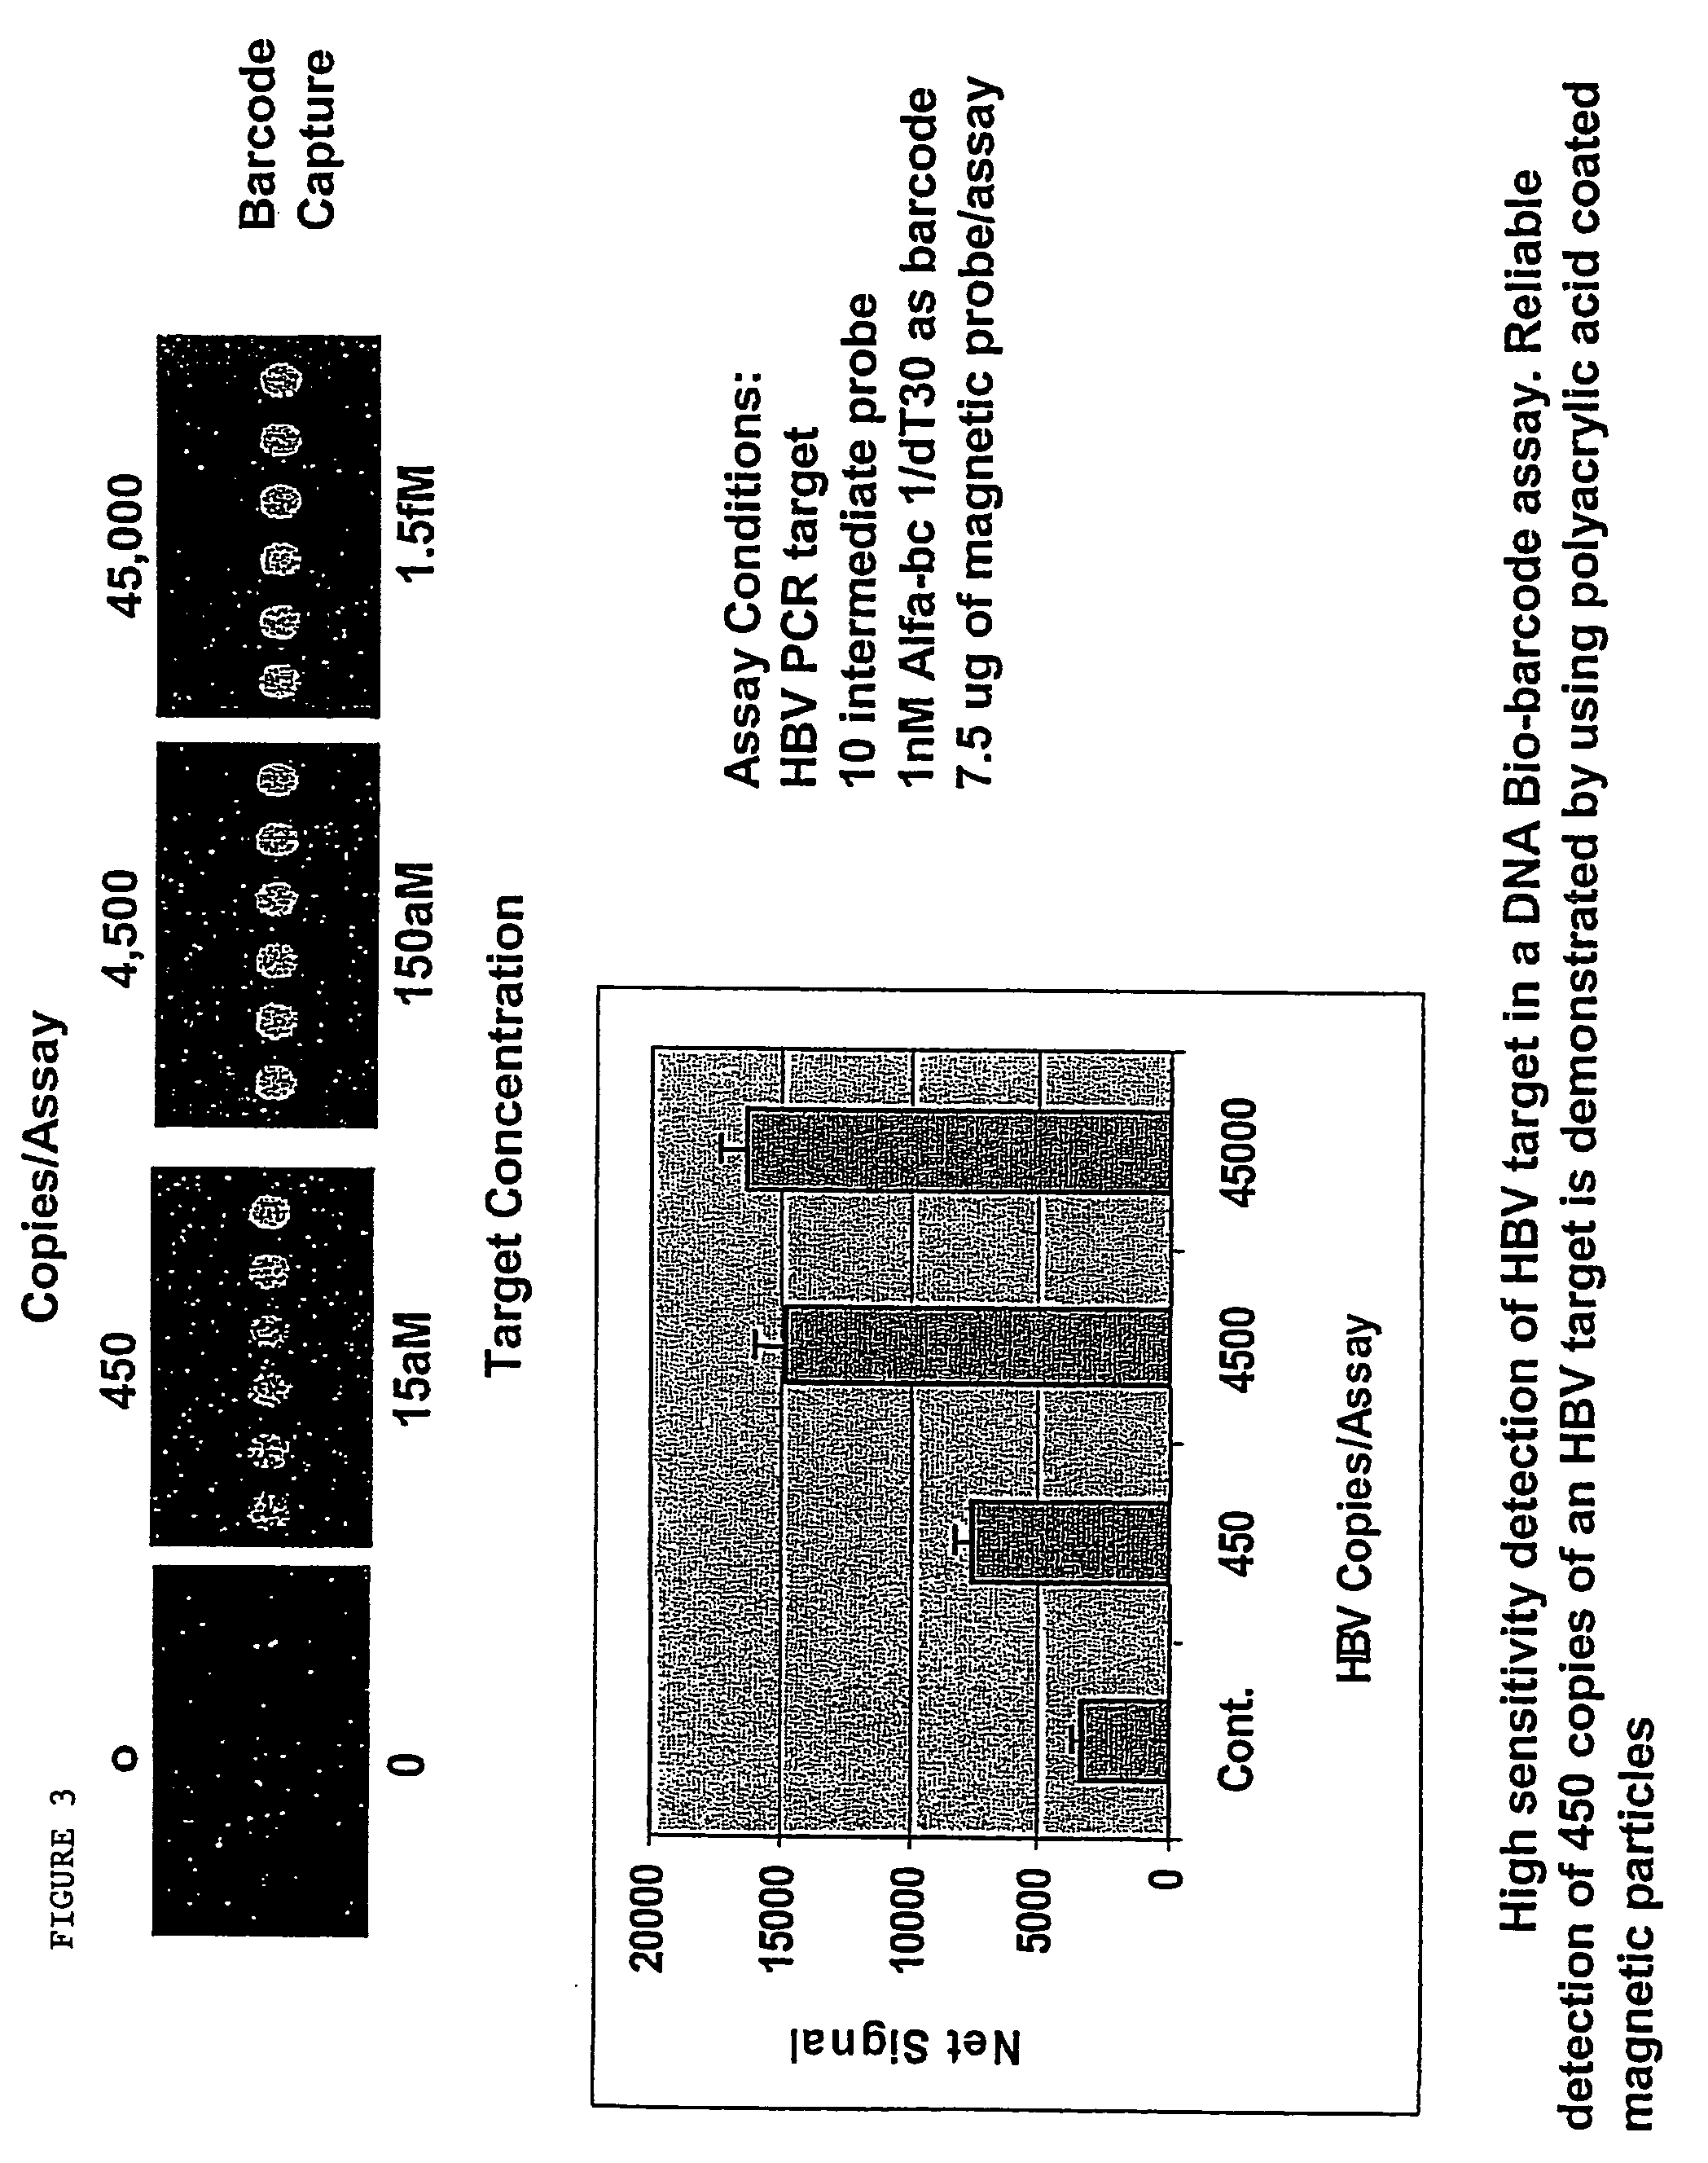 Substrate functionalization method for high sensitivity applications